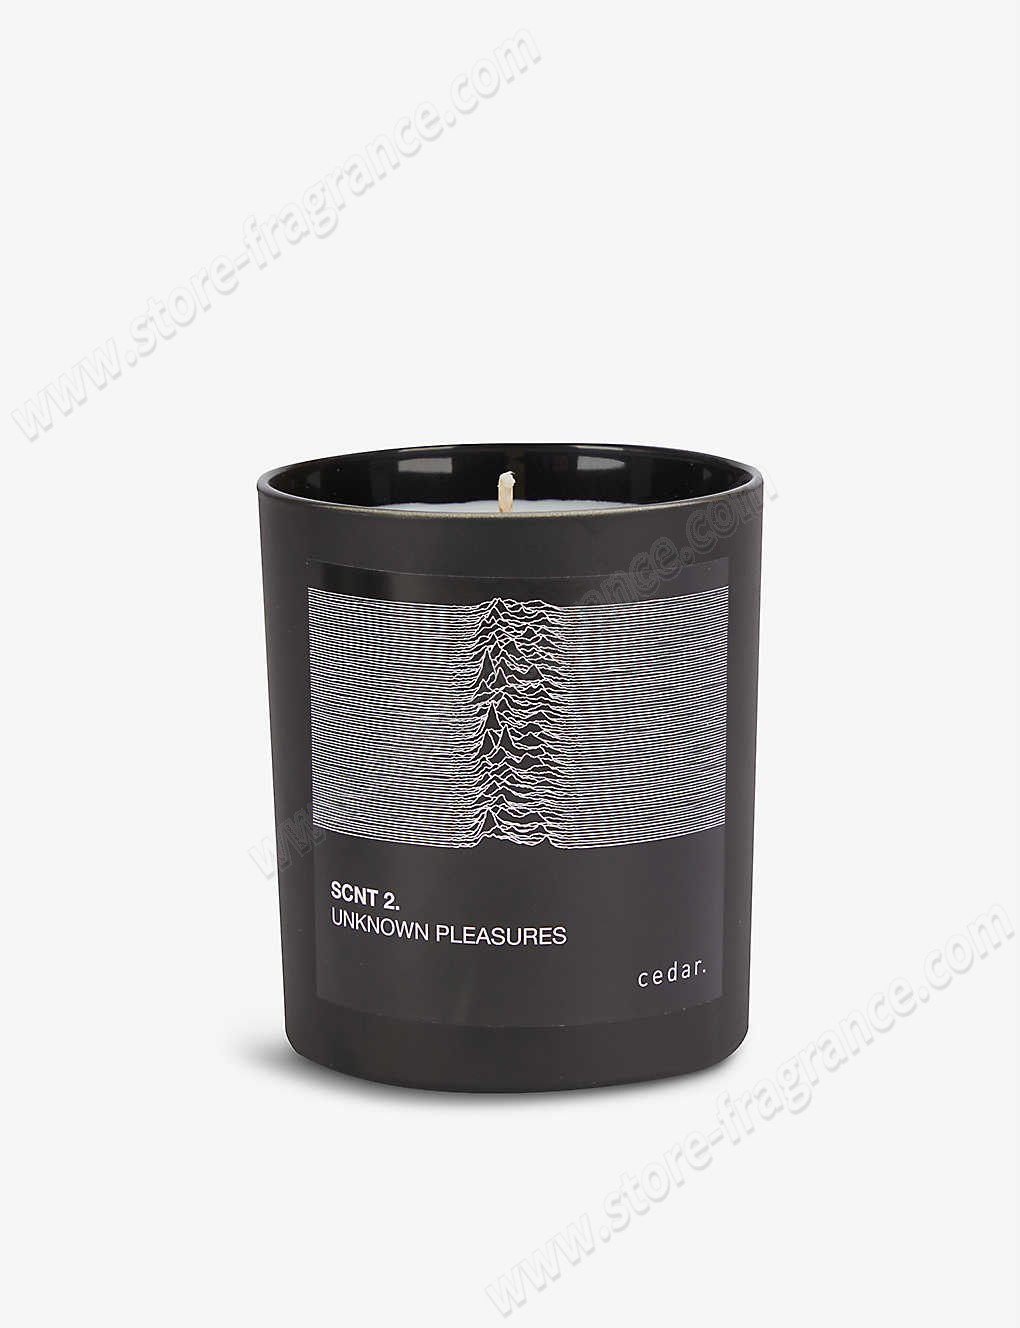 FACTORY RECORDS/Factory Records x Cedar Joy Division SCNT 3. Unknown Pleasures natural-wax candle 240g ✿ Discount Store - FACTORY RECORDS/Factory Records x Cedar Joy Division SCNT 3. Unknown Pleasures natural-wax candle 240g ✿ Discount Store